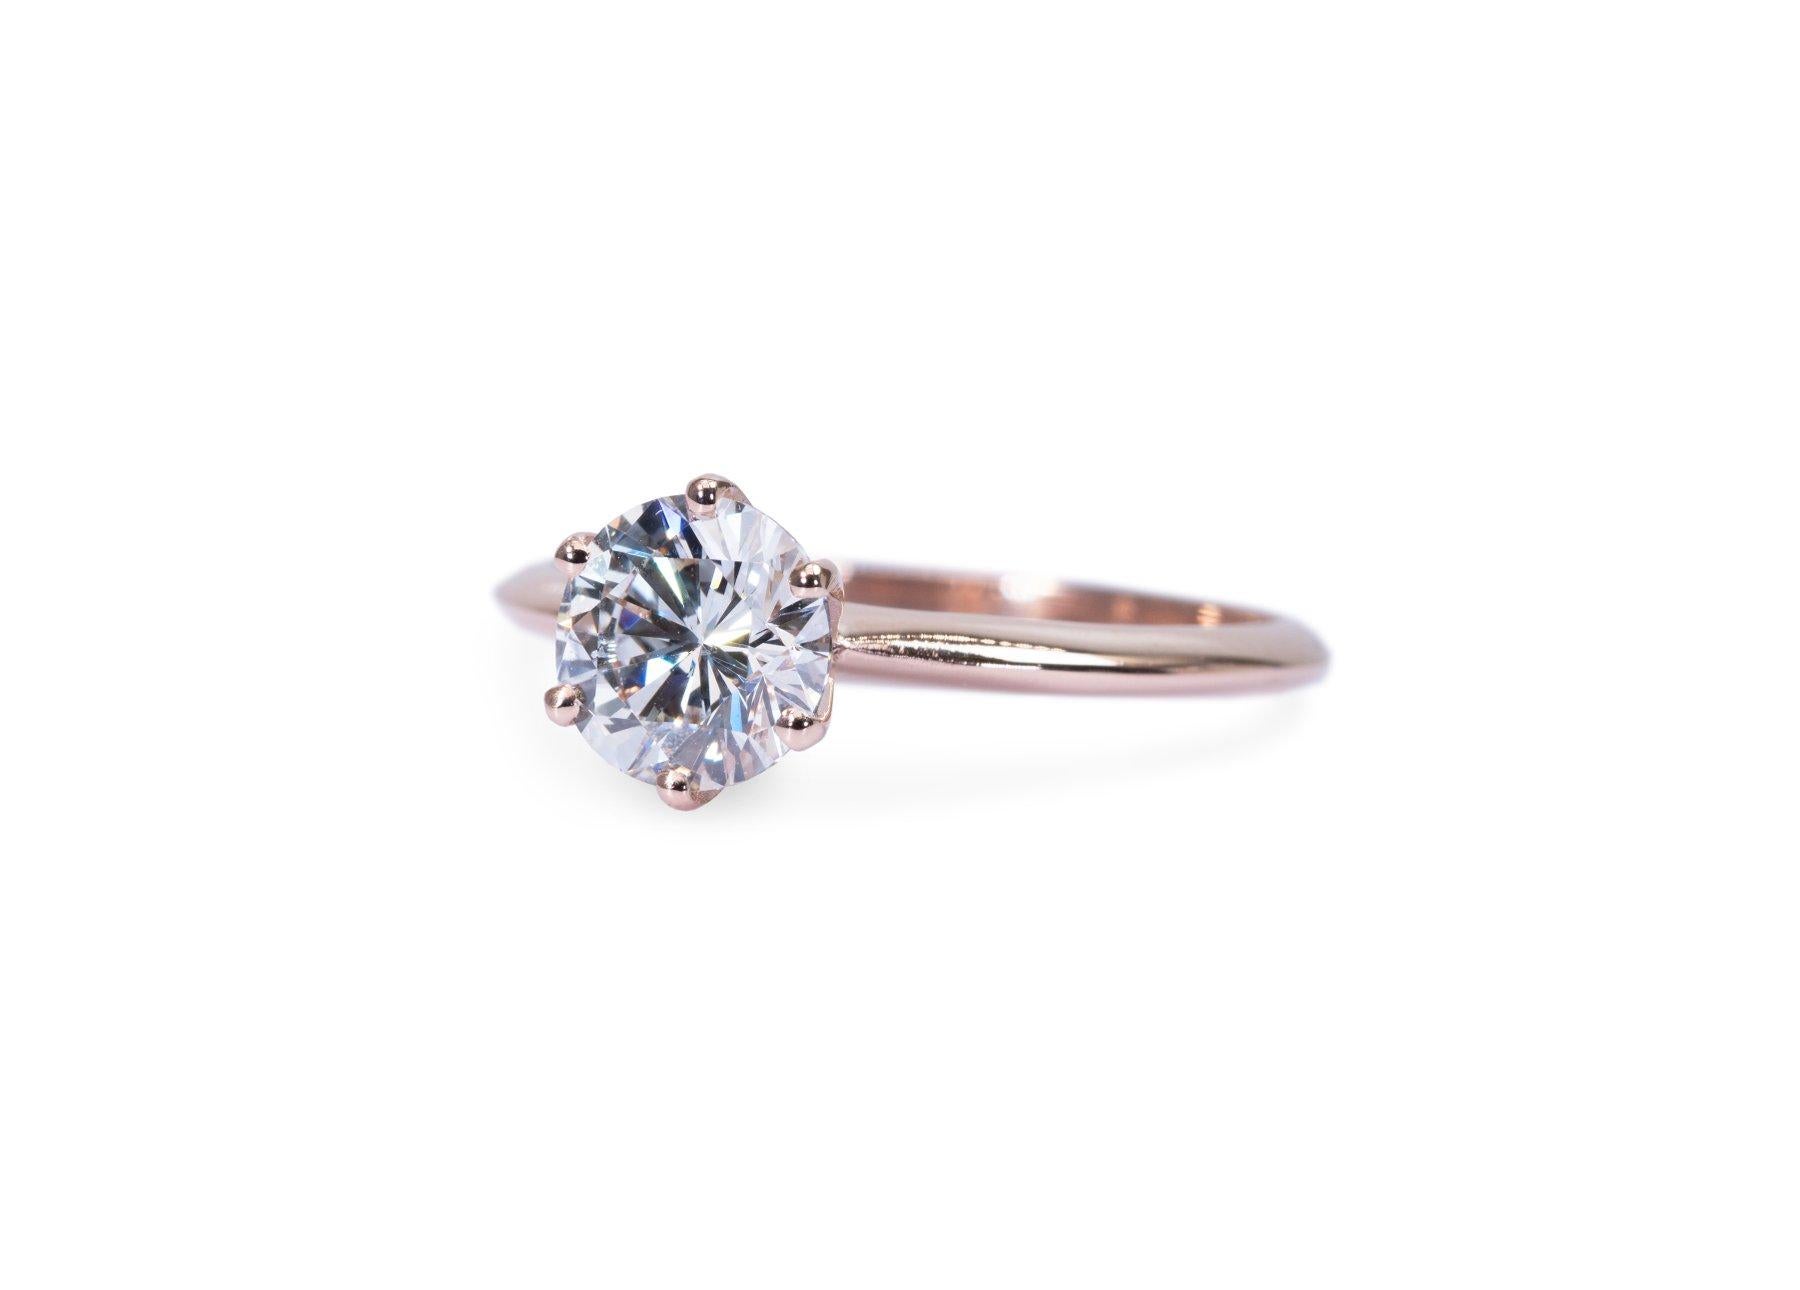 Exquisite 1.09ct Diamond Solitaire Ring in 18k Rose Gold - GIA Certified In New Condition For Sale In רמת גן, IL